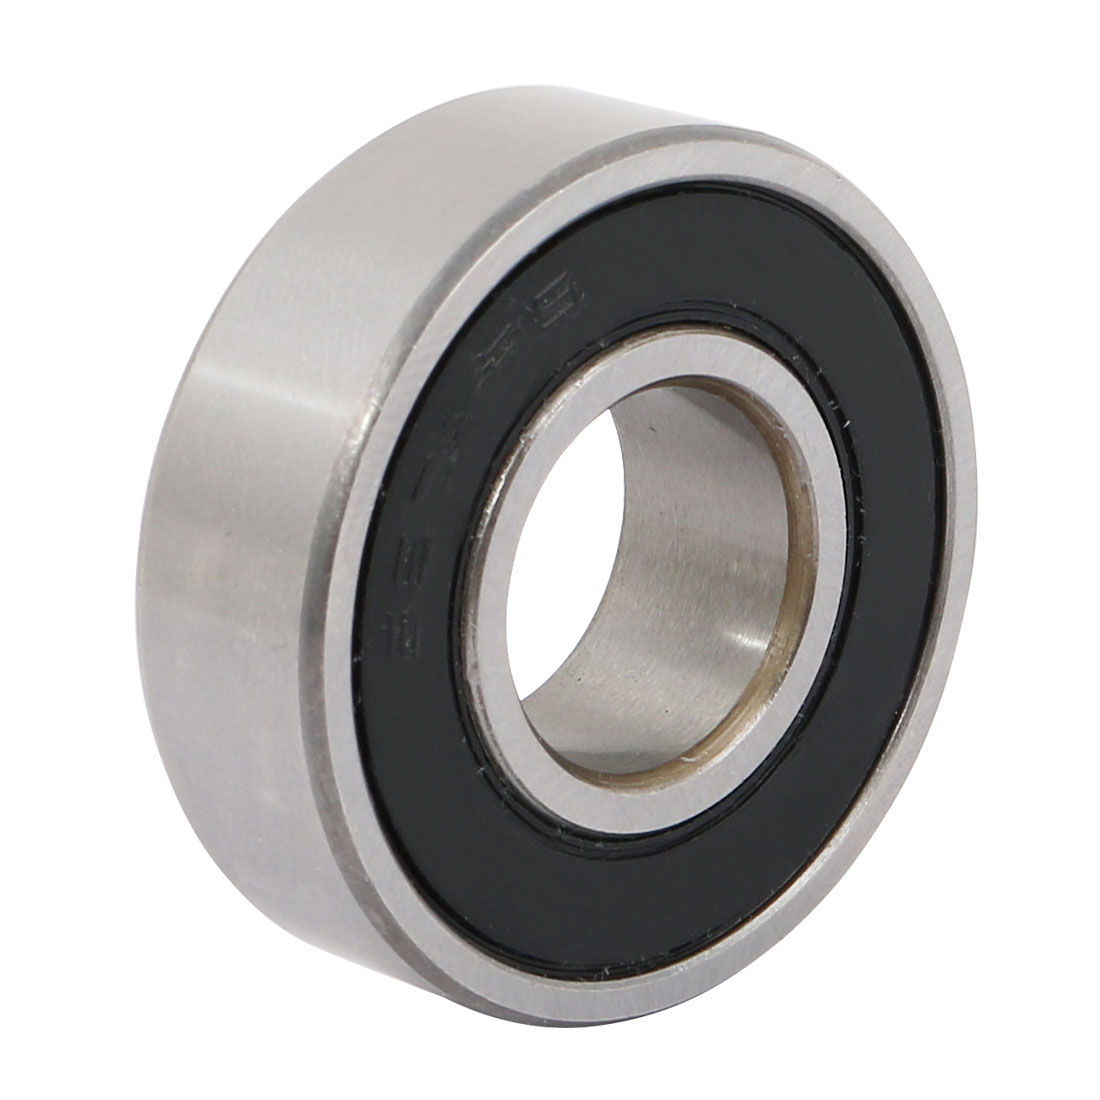 Unique Bargains Replacement 6202RS Roller-Skating Deep Groove Ball Bearing 35x15x11mm